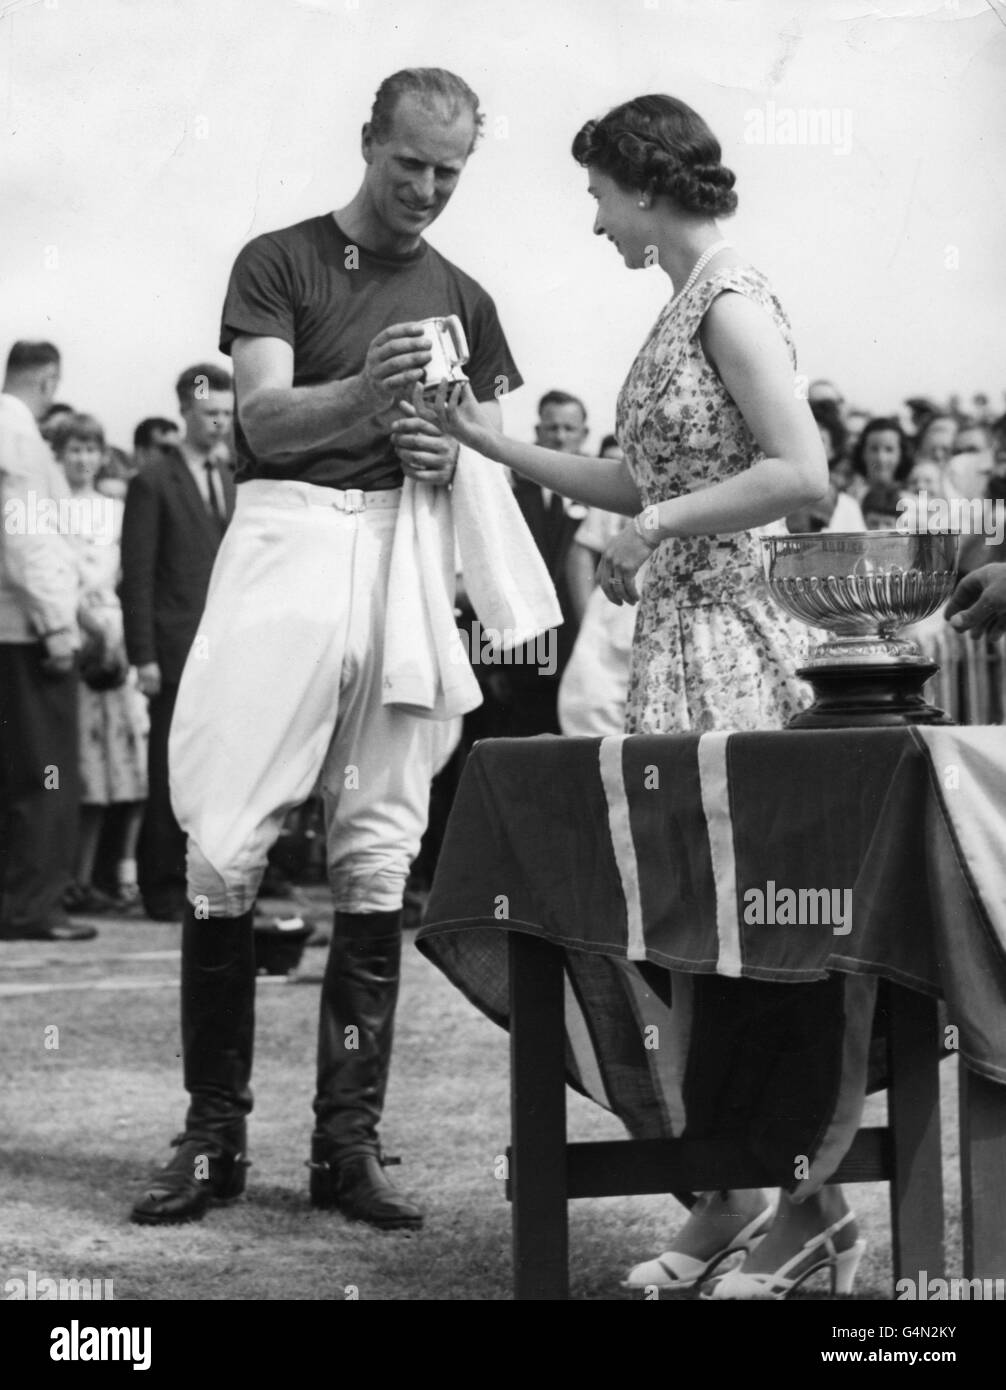 Queen Elizabeth II presents a tankard to her husband, the Duke of Edinburgh, a member of the winning Friar Park team in an invitation polo match against Silver Leys on Smith's Lawn, Windsor Great Park. Stock Photo